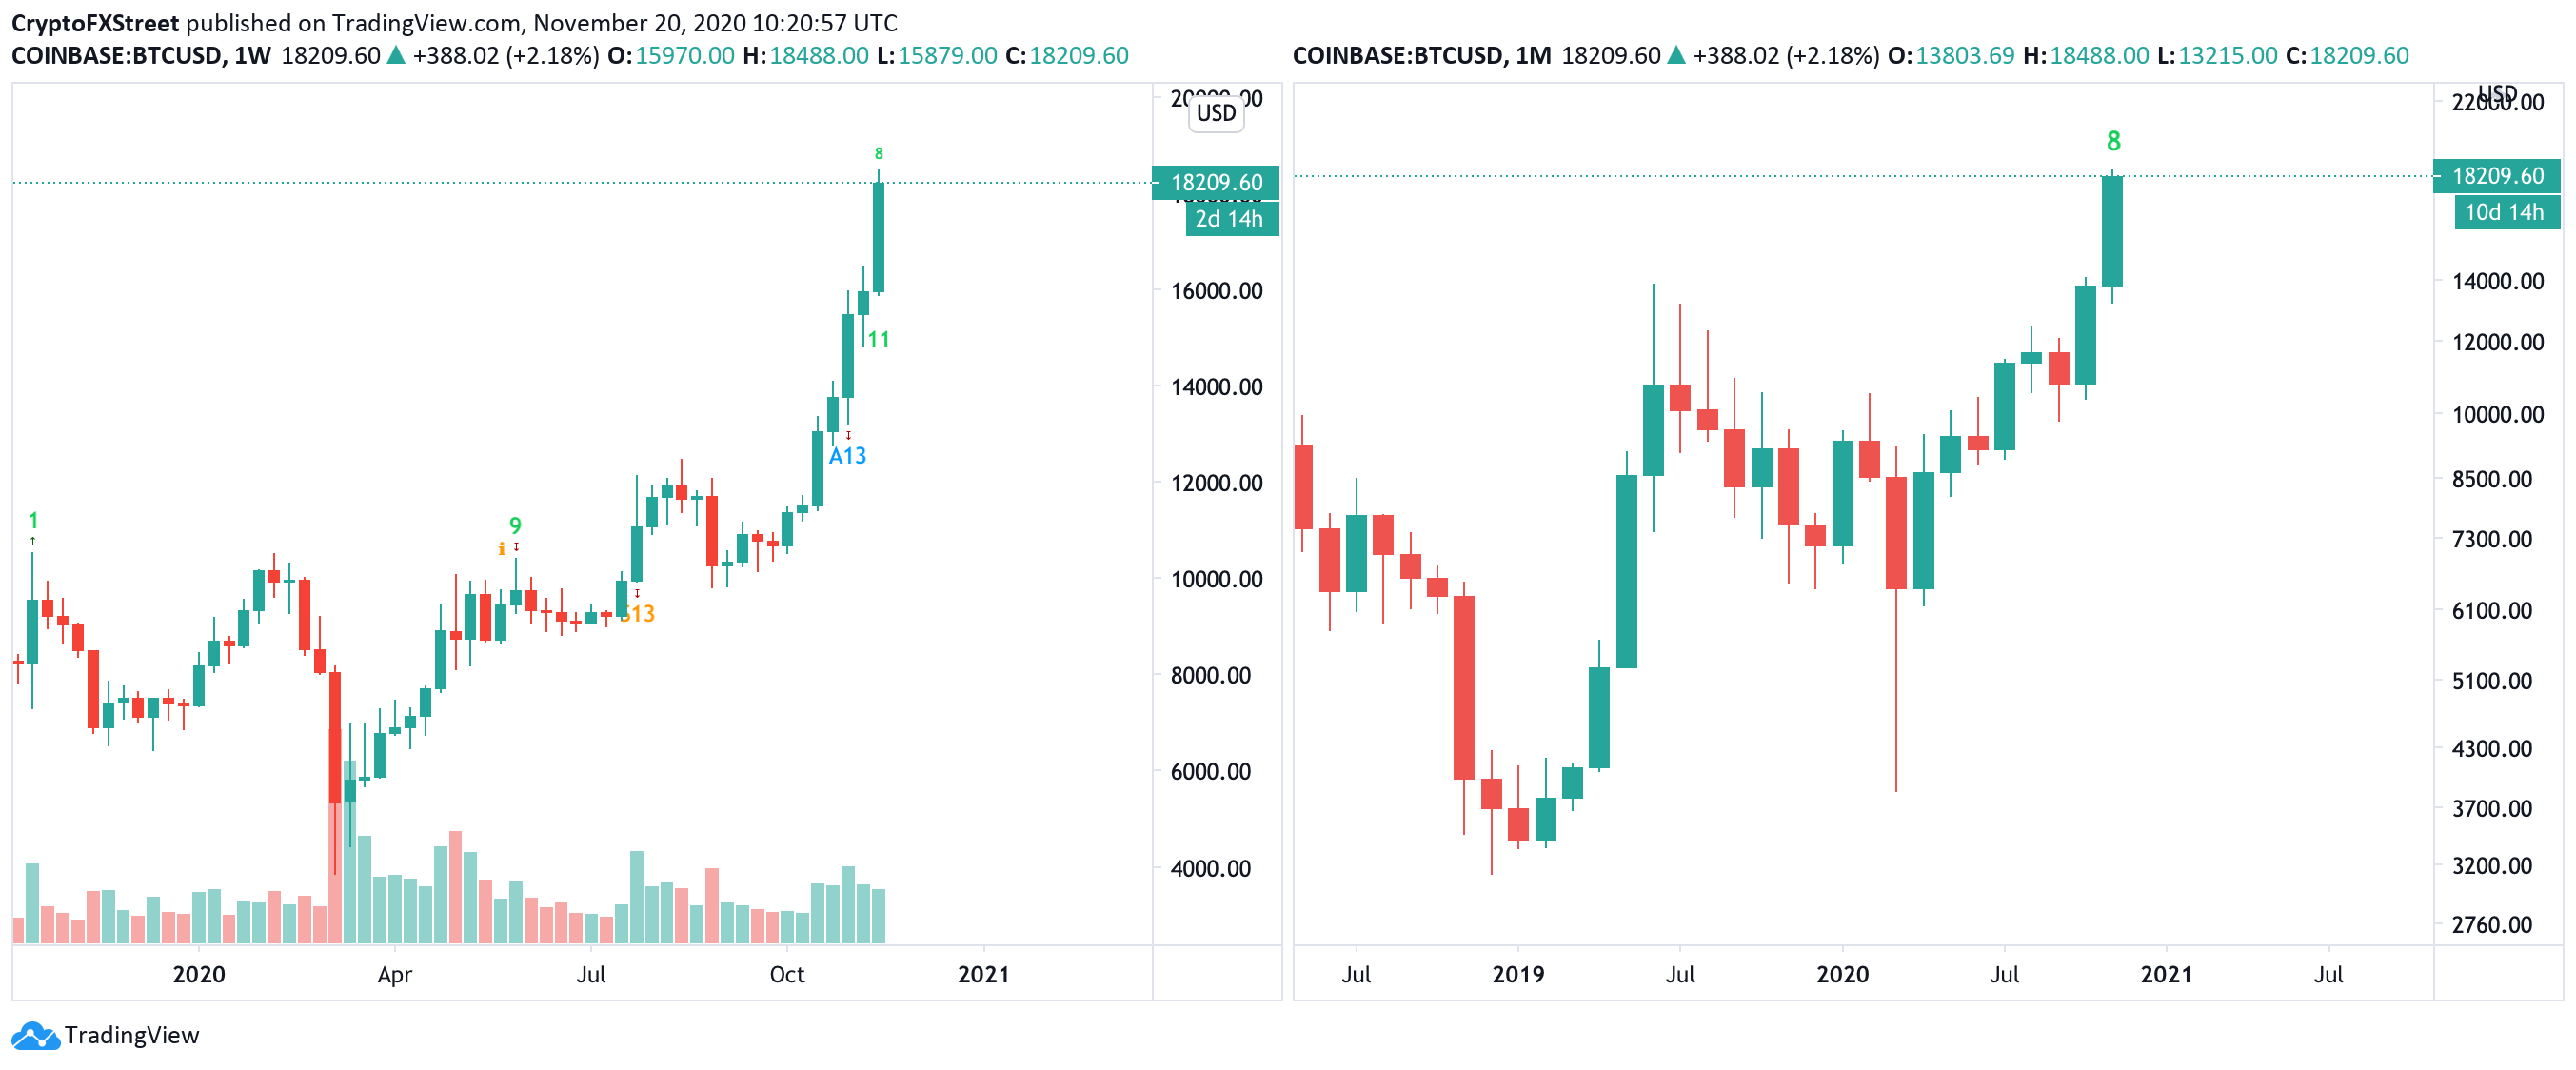 BTC/USD weekly and monthly charts